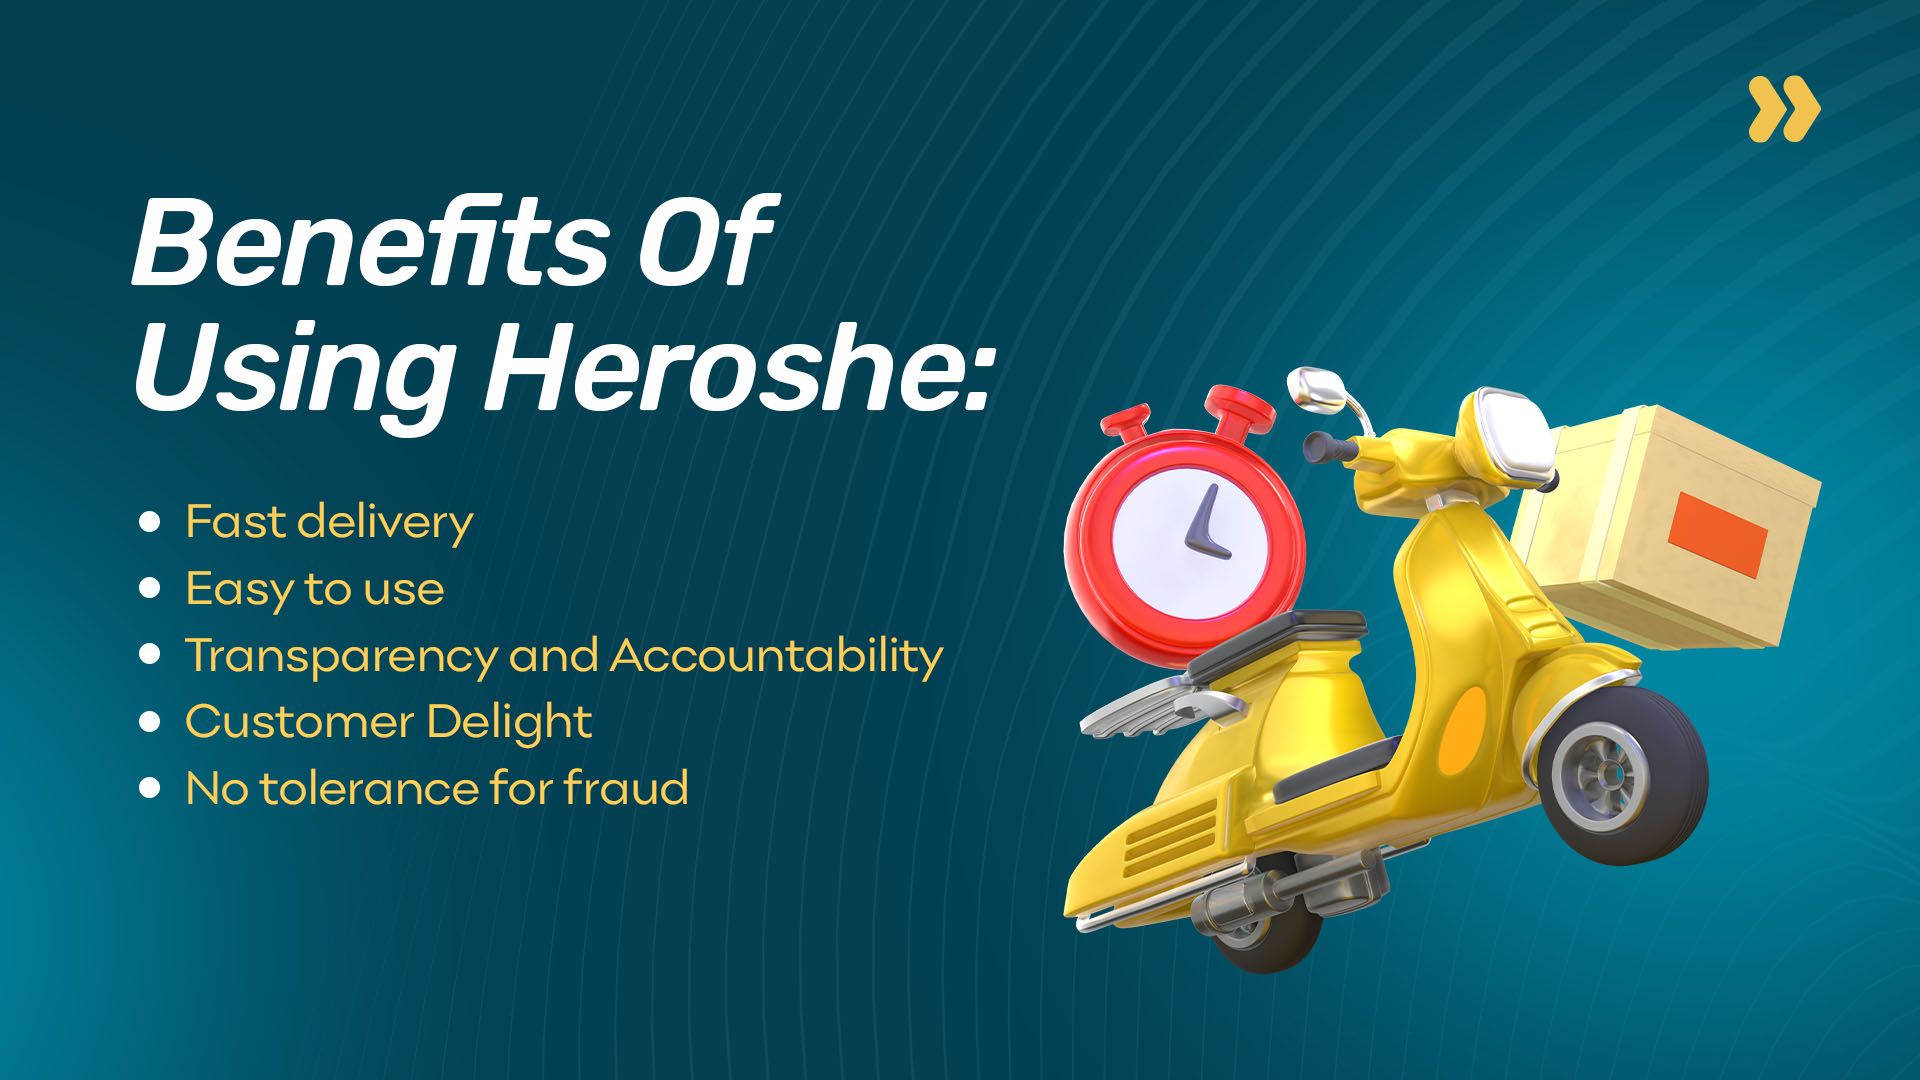 Benefits of shipping with Heroshe